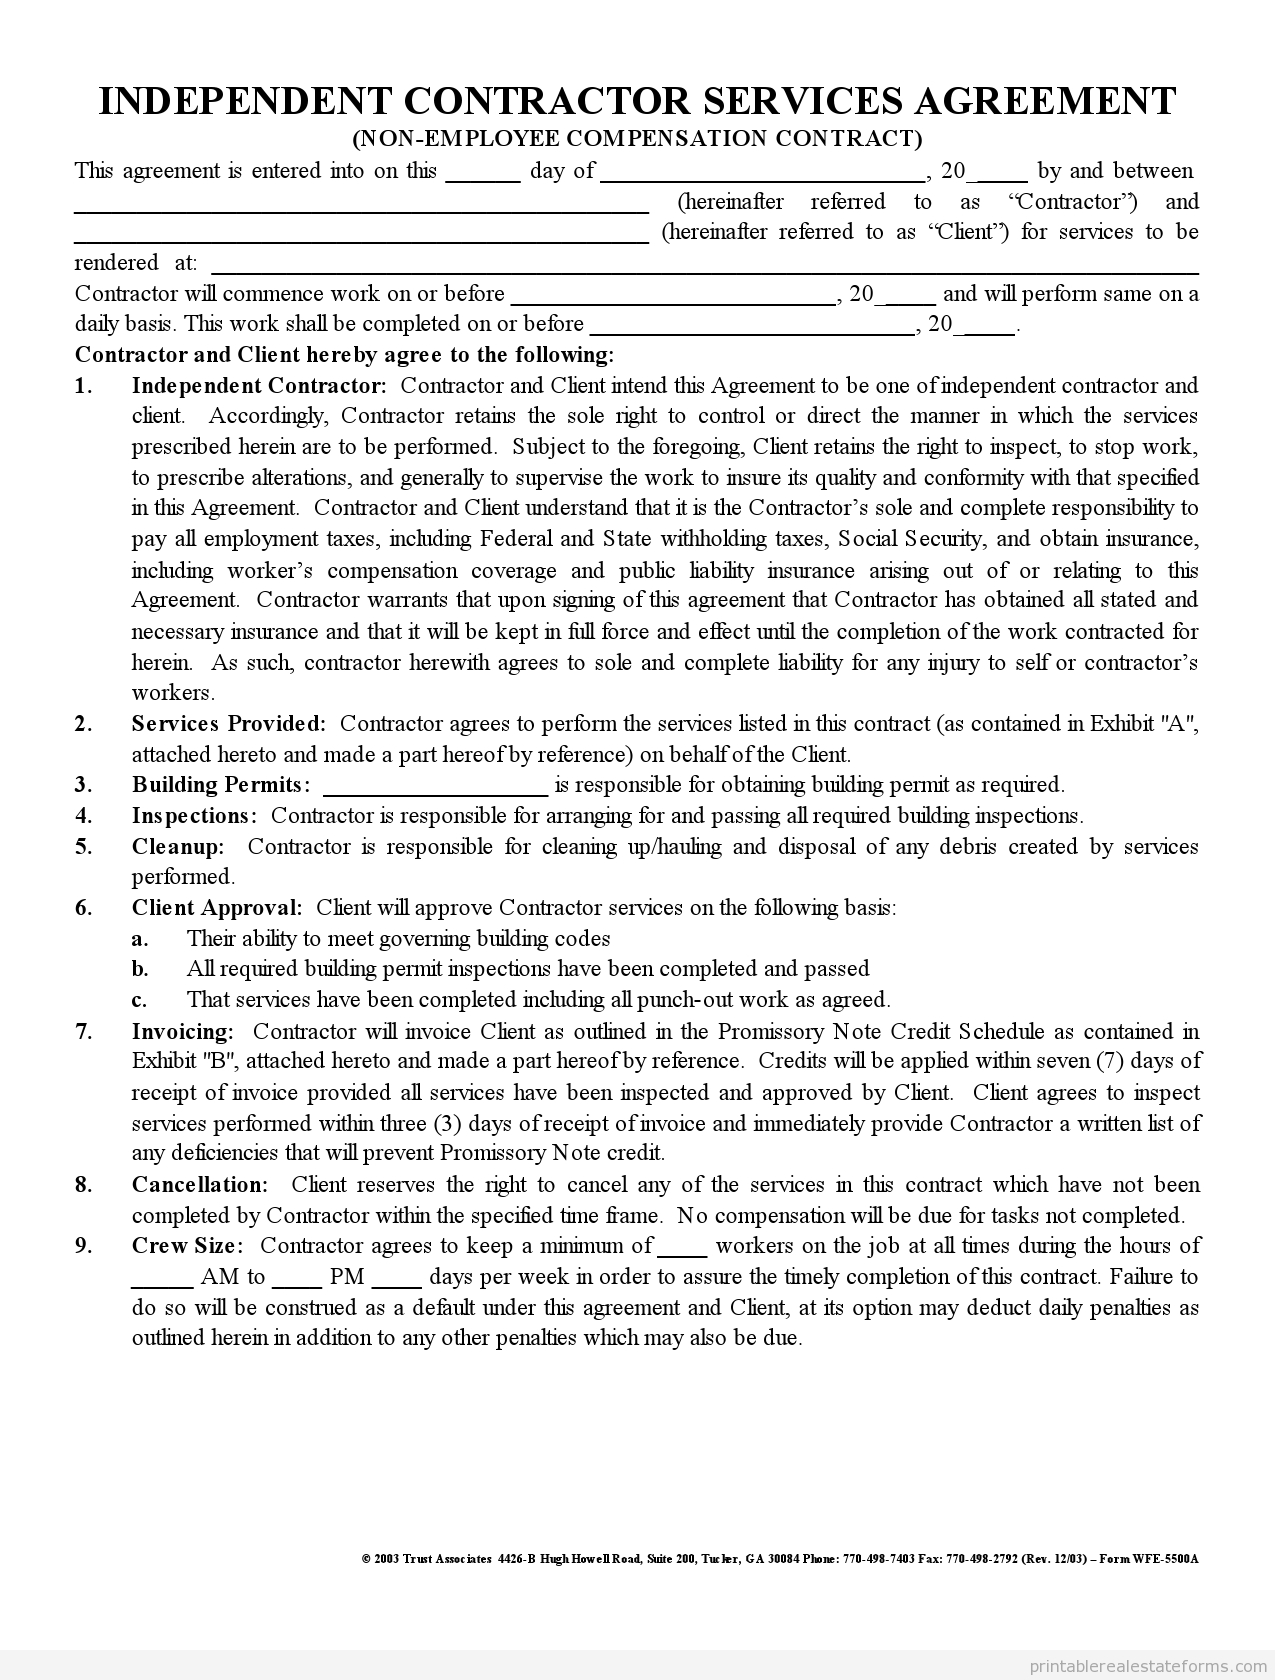 Free Printable Independent Contractor Agreement Form | Printable - Free Printable Construction Contracts